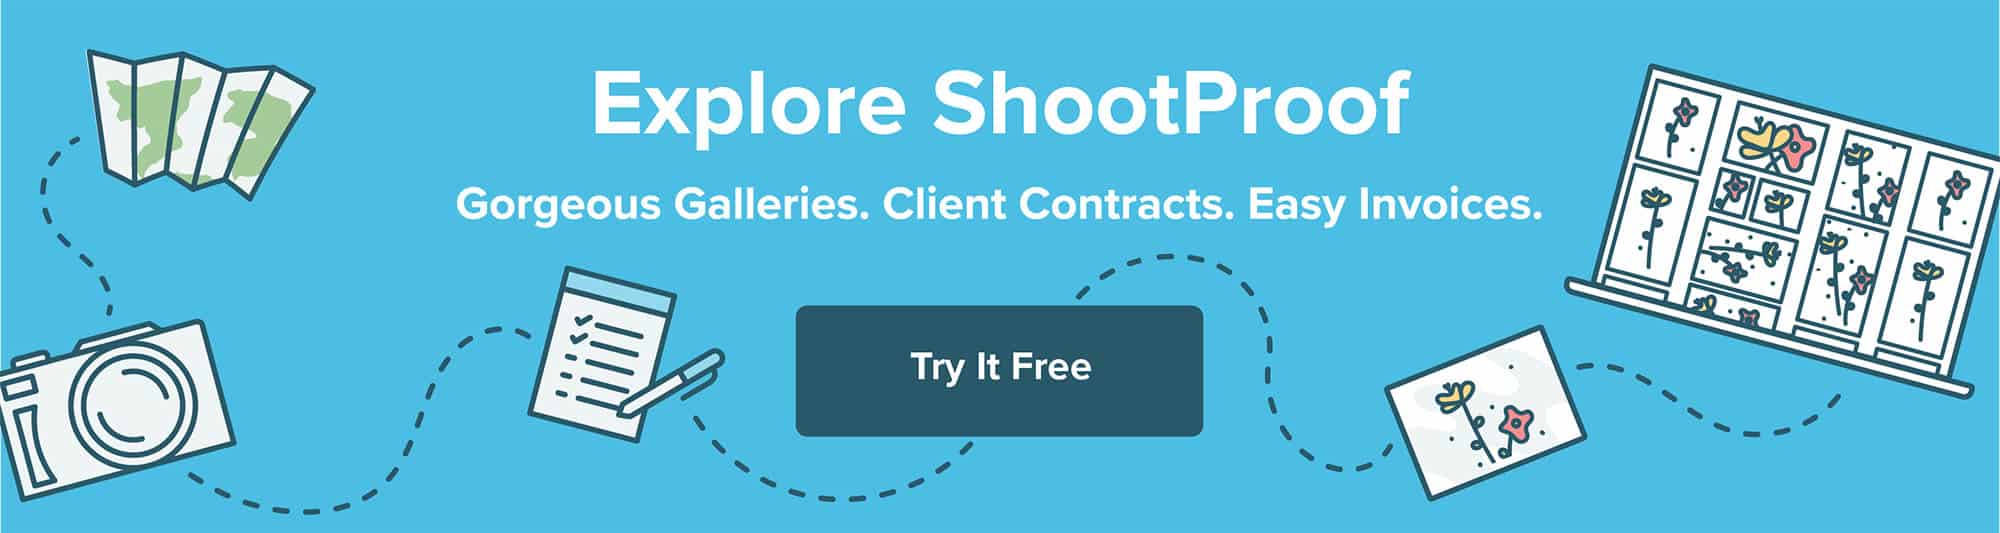 ShootProof online galleries for wedding photographers, complete with contracts, invoices, and sales and marketing tools